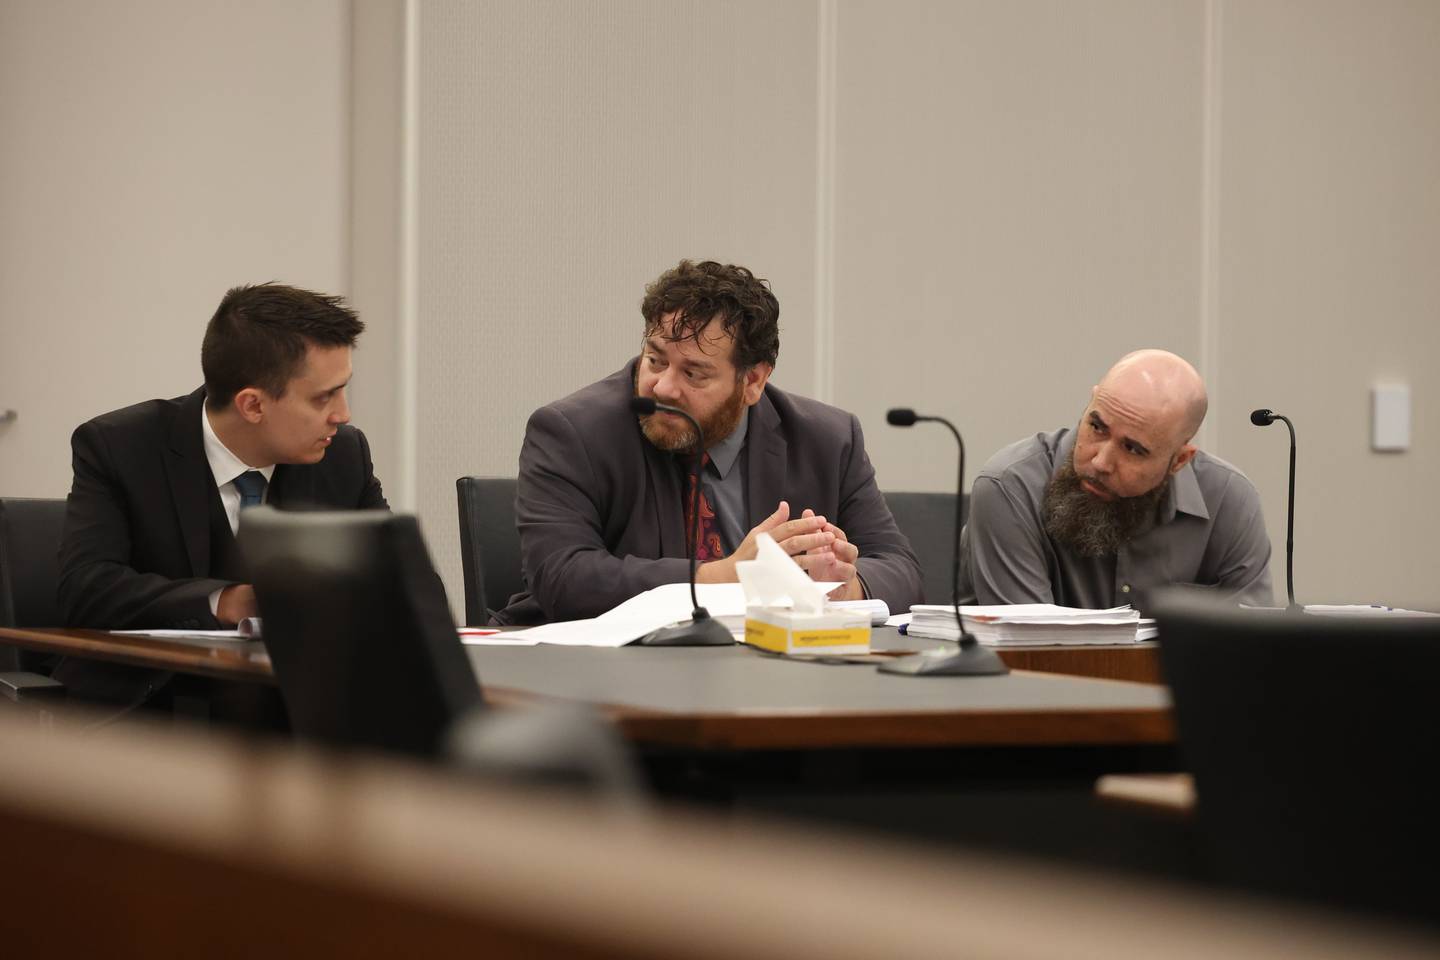 Jermaine Mandley, 47, of Bolingbrook, right, listens to his defense team Zack Strupeck, left, Phil Villasenor converse at the Will County Courthouse on Thursday, Aug. 17, 2023 in Joliet. Mandley is on trial for the alleged shooting of Maya Smith, 24, in June 2022.